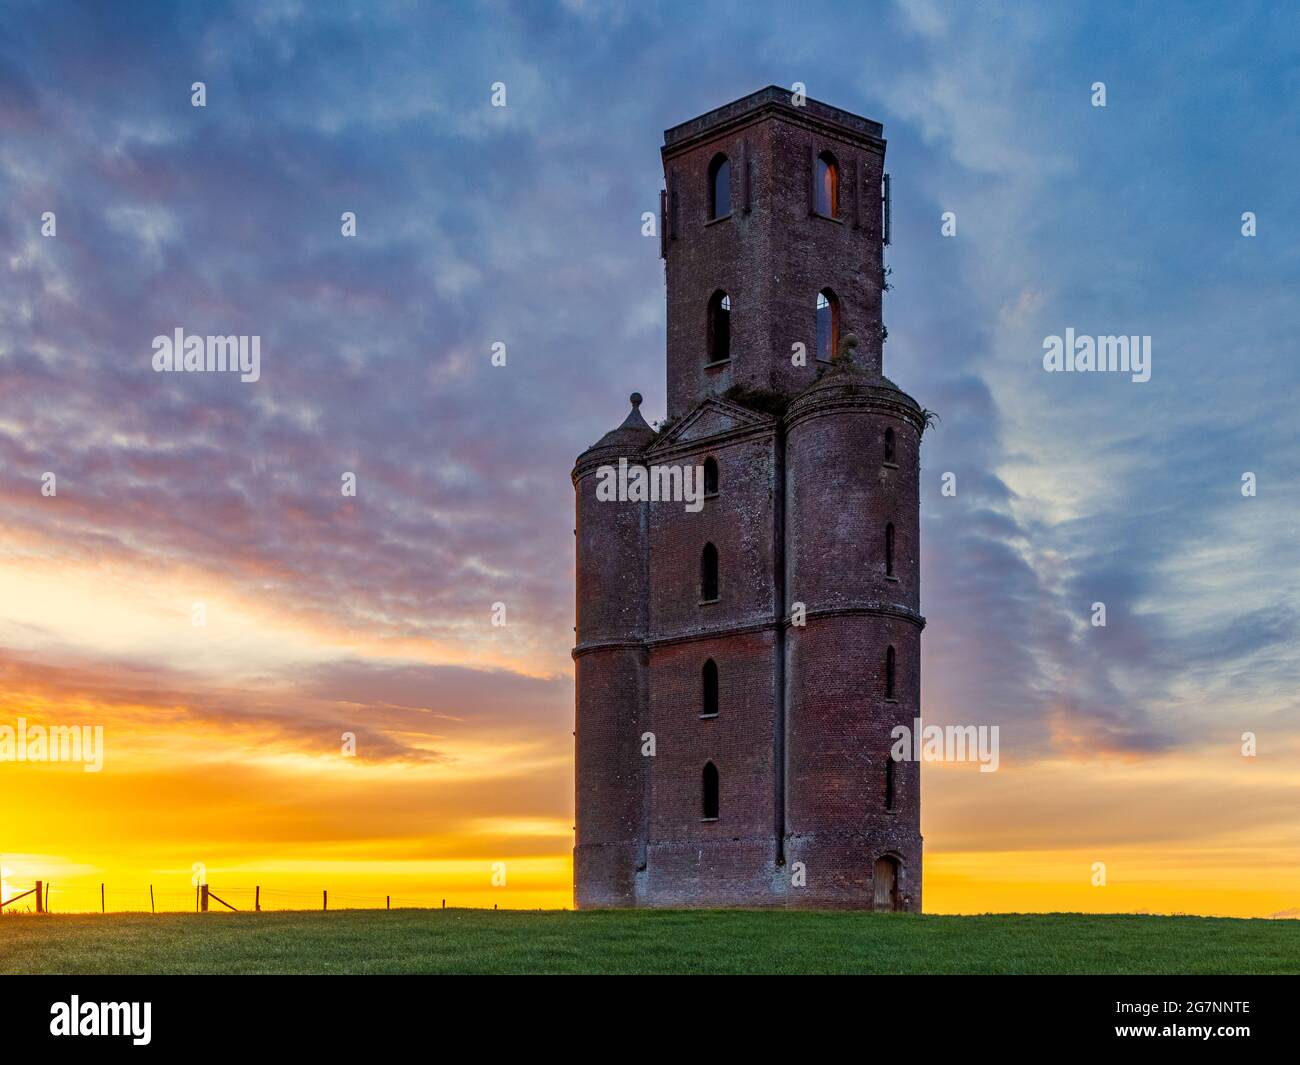 Sunrise at Horton Tower in Dorset, a five storey 43 metres high gothic red brick observatory / folly designed by Humphrey Sturt in the 18th century. Stock Photo